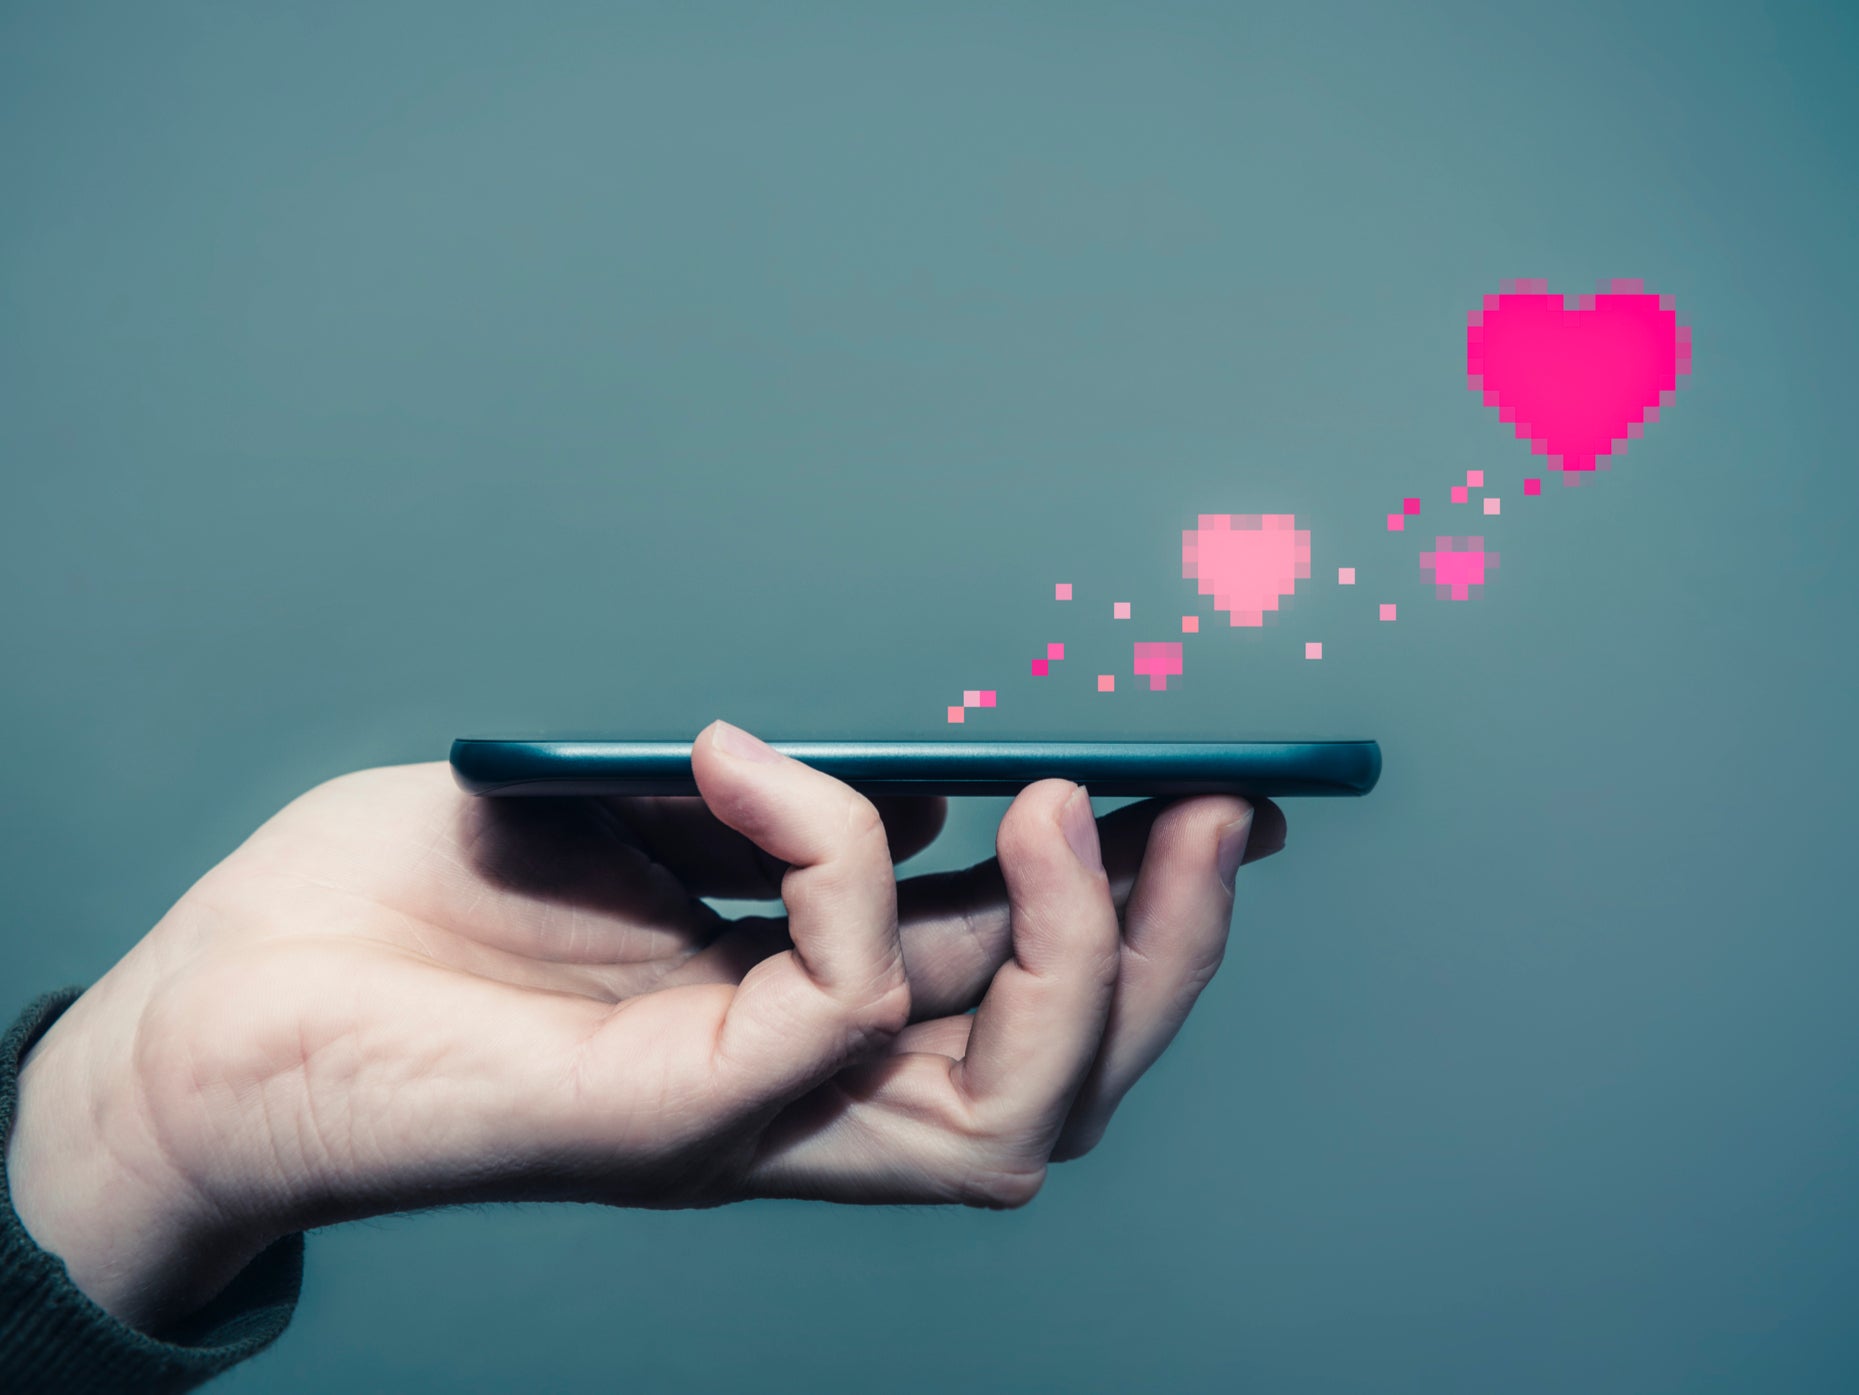 Almost 20 per cent of women say they have been threatened by someone on a dating site or app